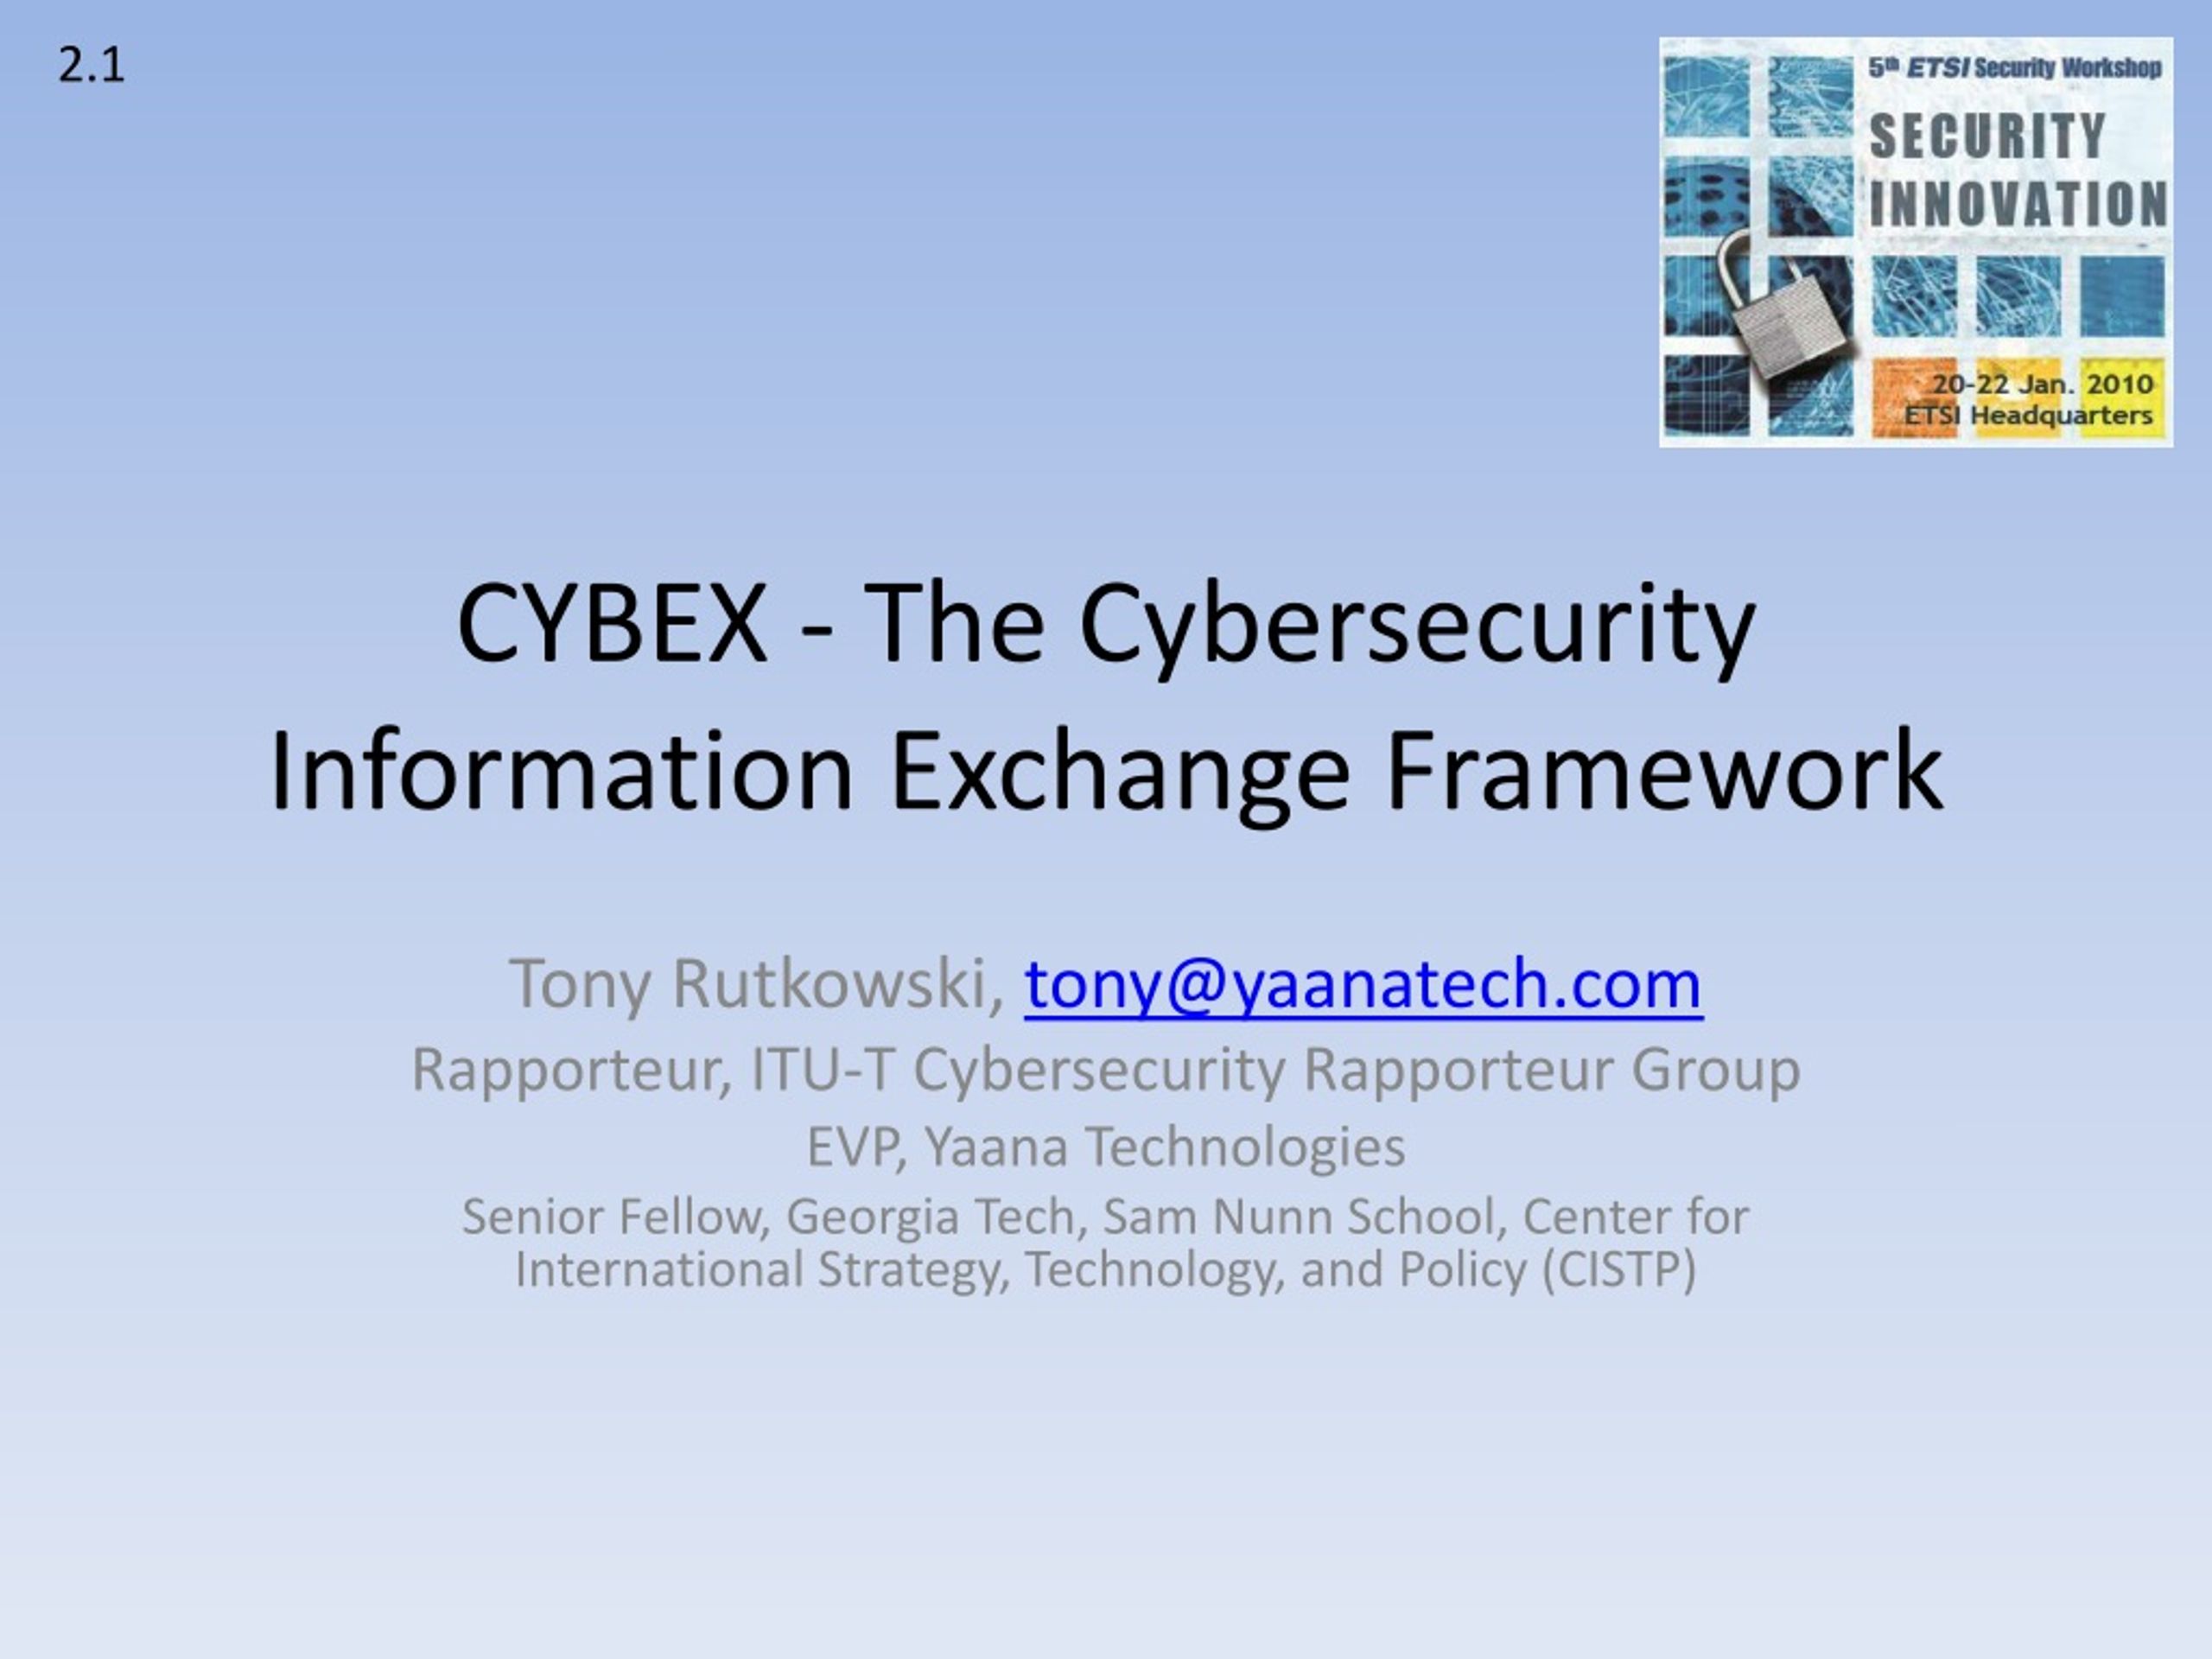 PPT - CYBEX - The Cybersecurity Information Exchange Framework